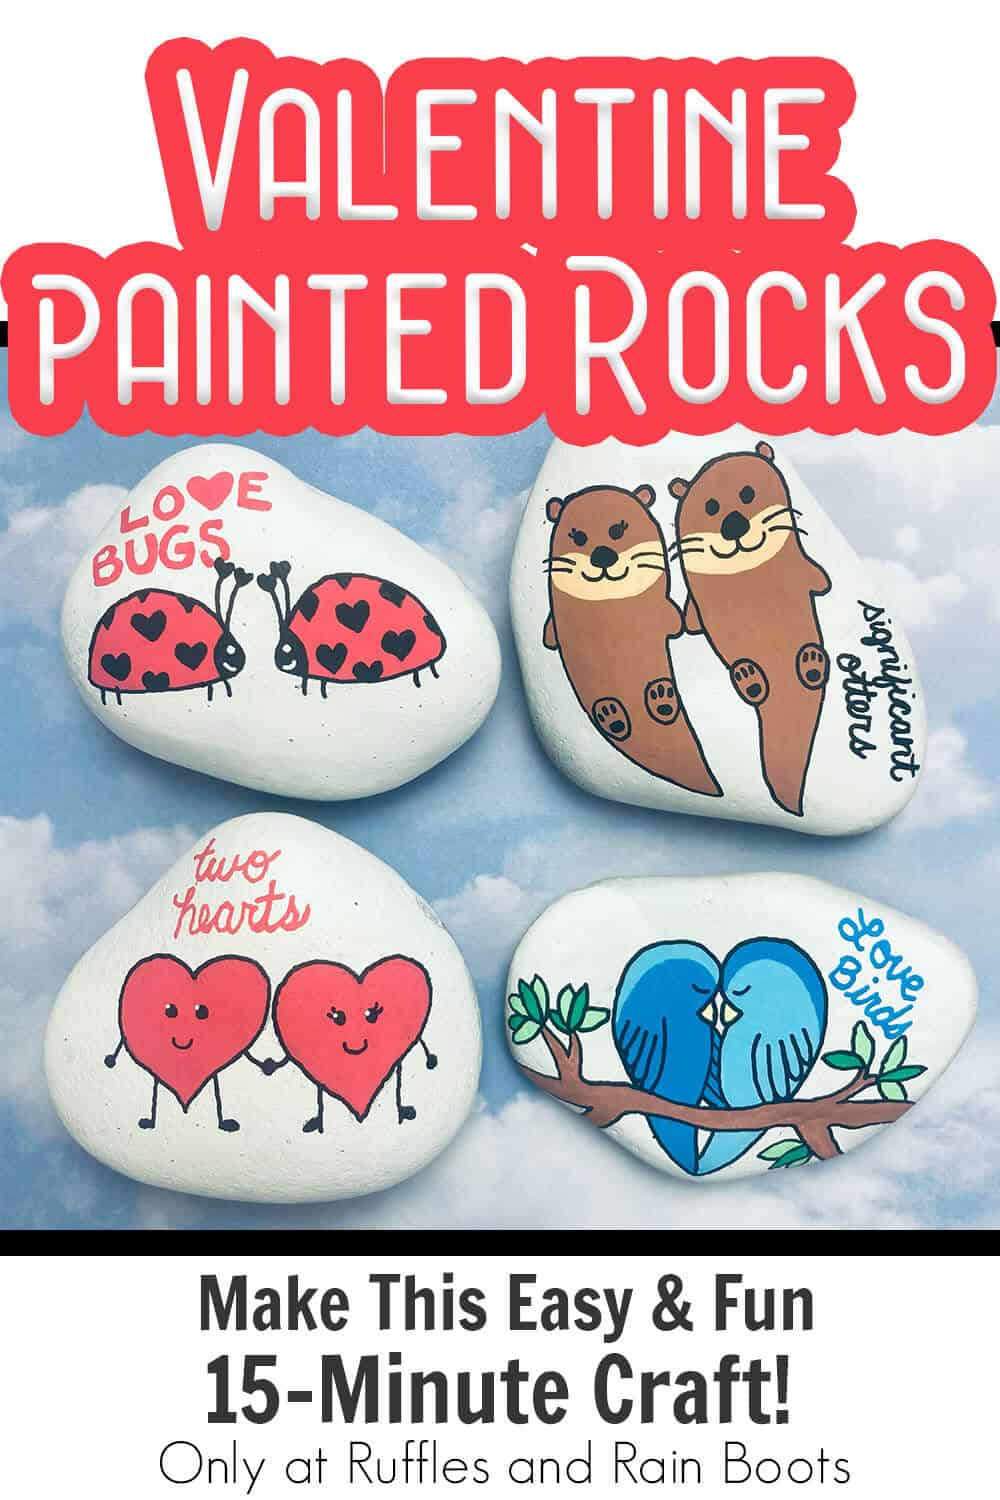 diy rock painting valentines with text which reads valentine painted rocks make this easy & fun 15-minute craft!